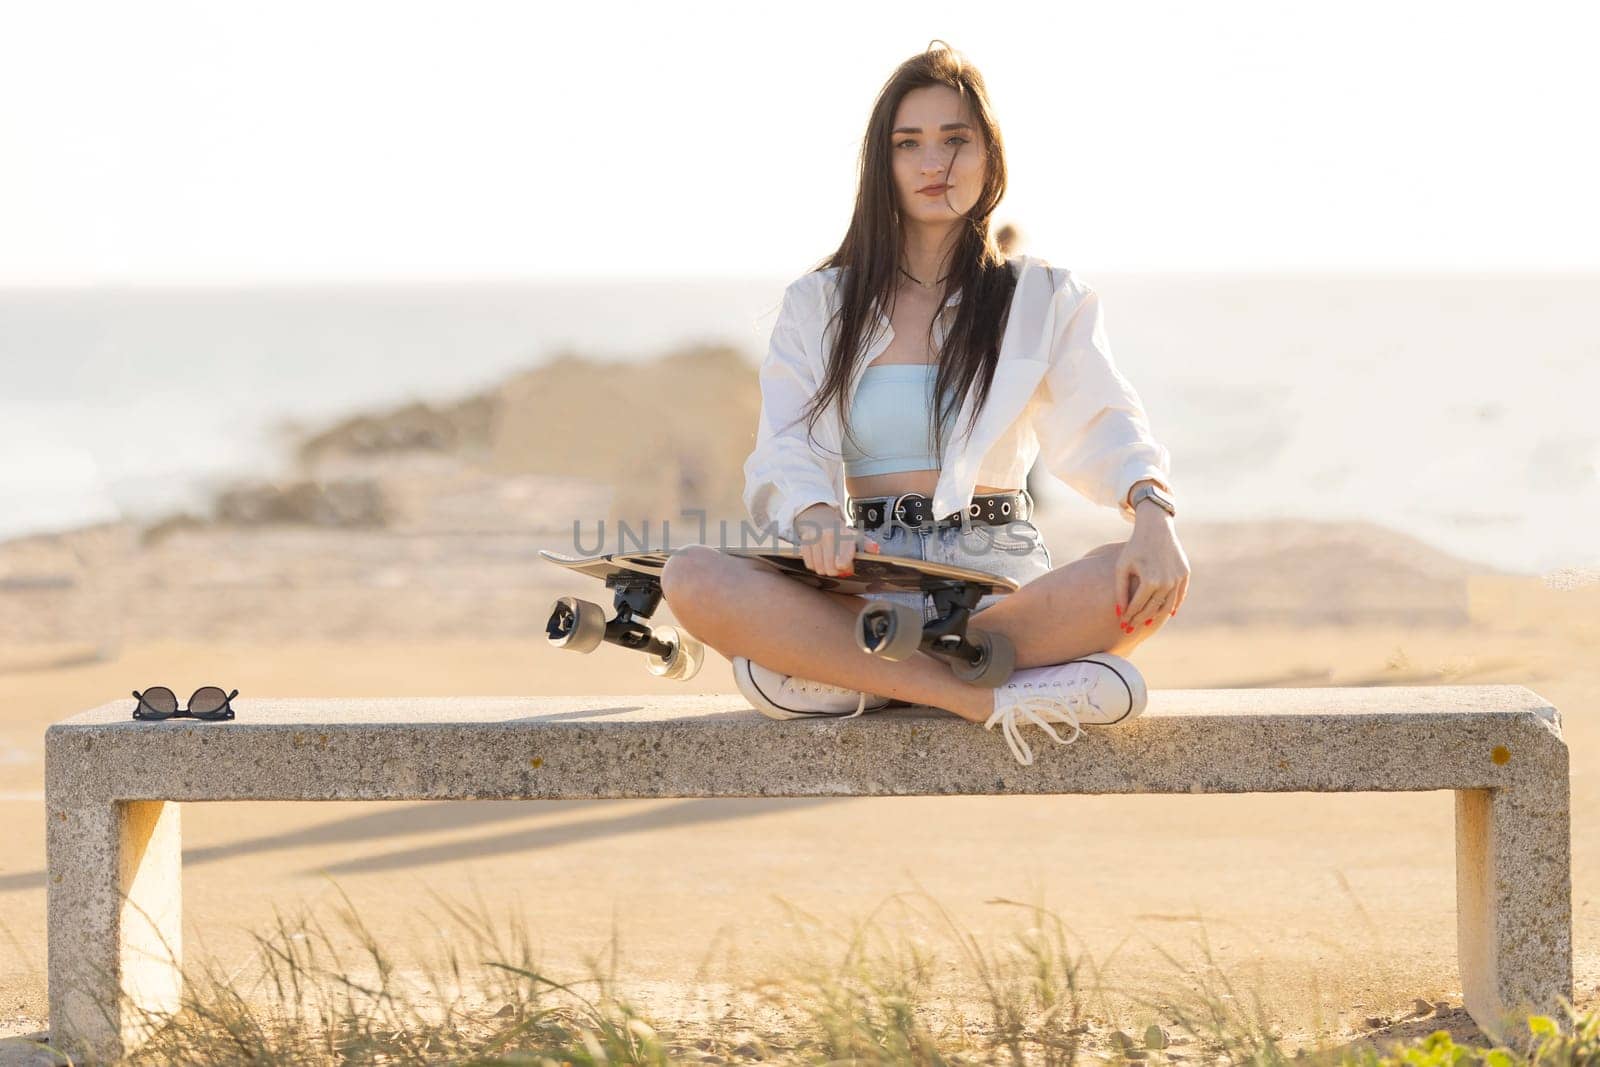 A woman is sitting on a bench with a skateboard in her hand. She is wearing a white shirt and blue shorts. The scene is set on a beach, with the ocean in the background